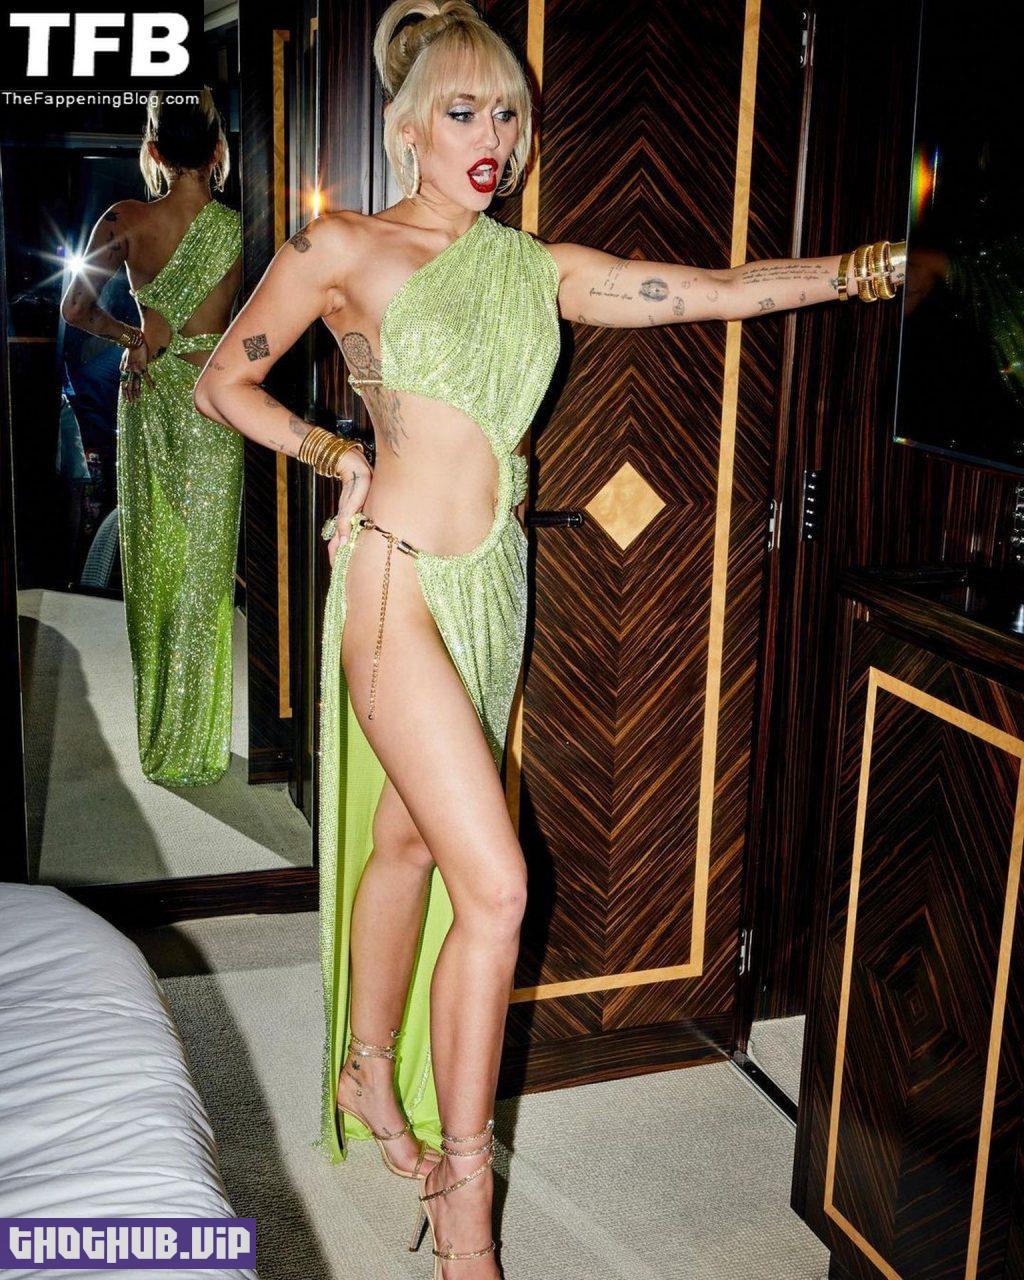 Miley Cyrus Pantyless in Sexy Dress 6 thefappeningblog.com